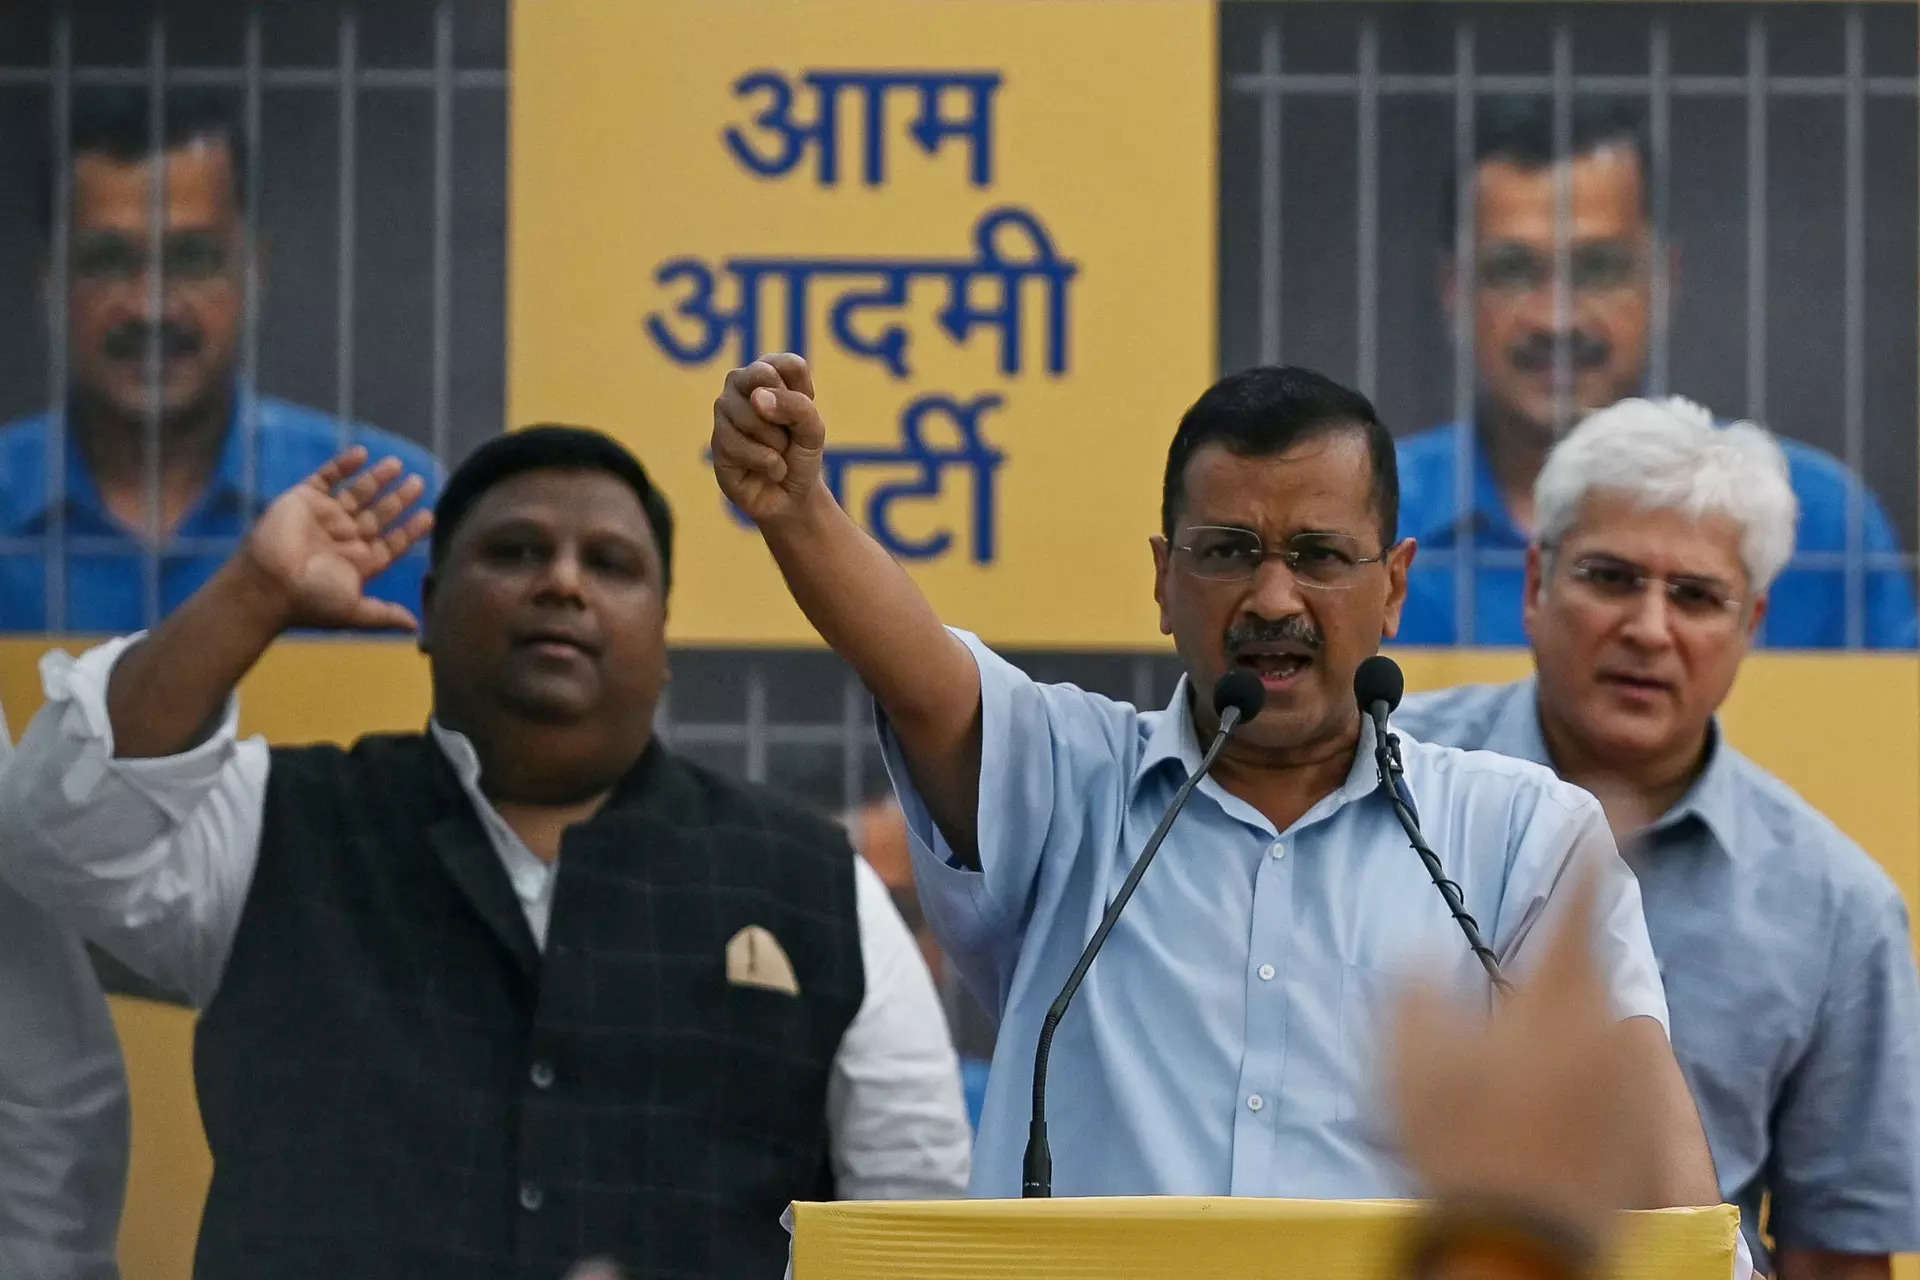 Delhi CM Arvind Kejriwal set to walk out of Tihar tomorrow after Rouse Avenue Court grants bail on ₹1 lakh bond 